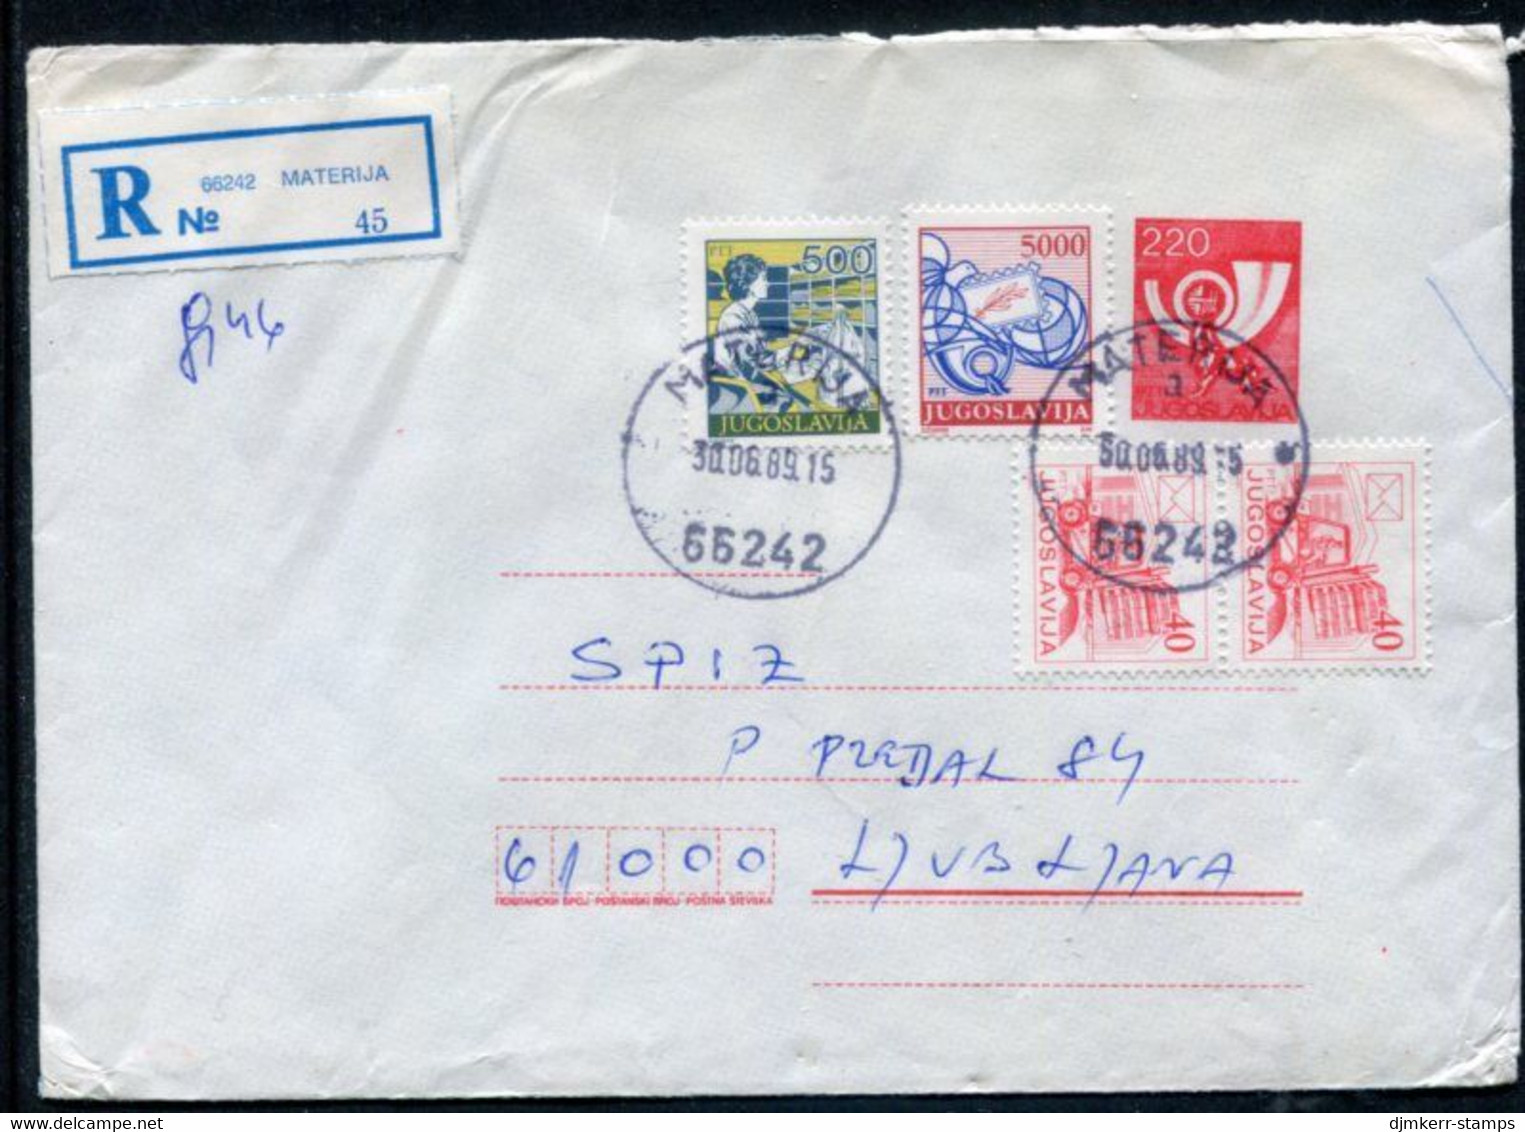 YUGOSLAVIA 1988 Posthorn 220 D.stationery Envelope Registered With Additional Franking.  Michel U83 - Entiers Postaux